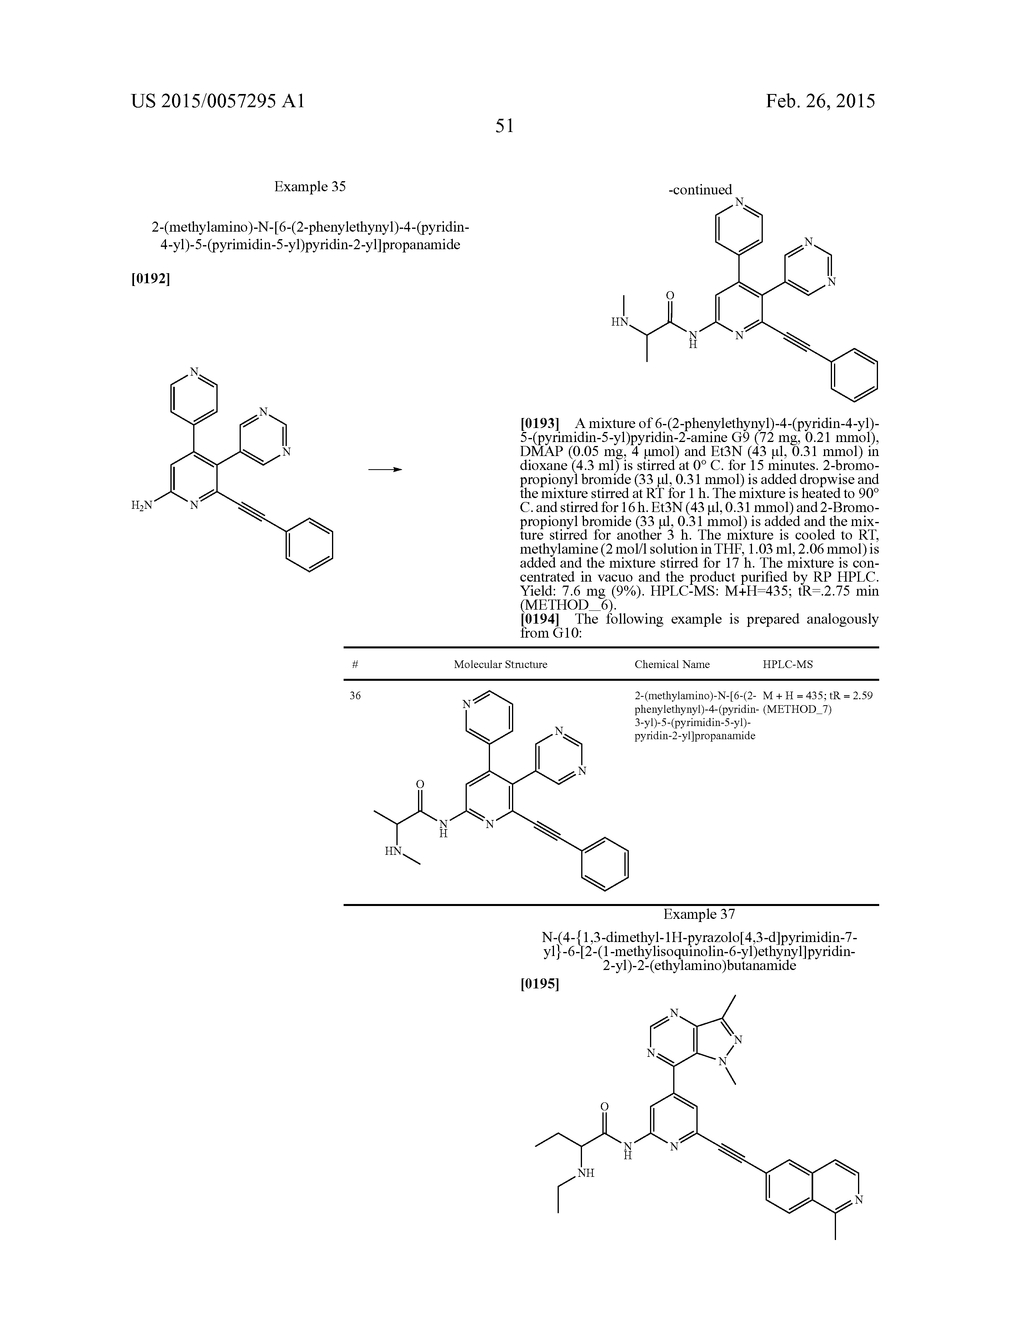 New 6-Alkynyl Pyridine - diagram, schematic, and image 52